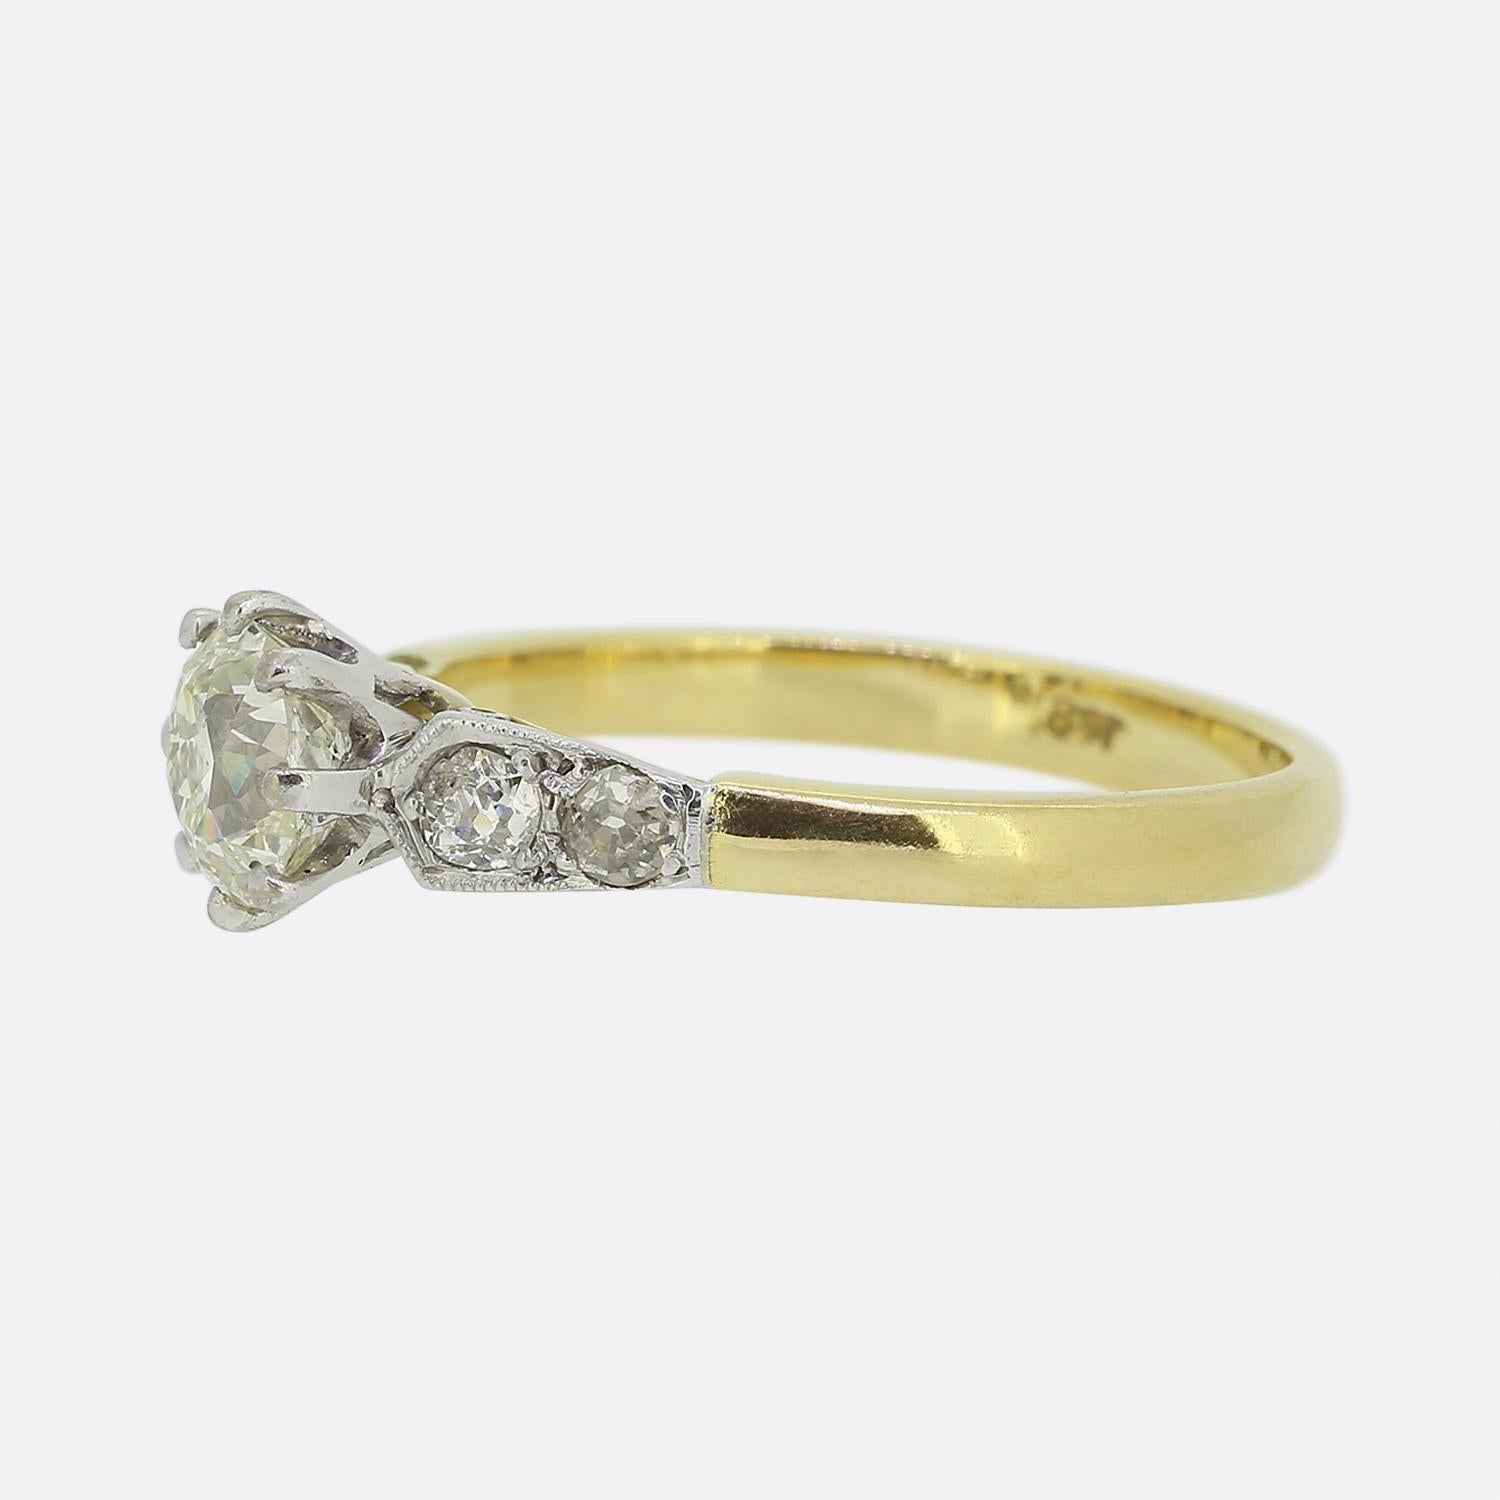 This is an 18ct yellow gold Edwardian diamond solitaire ring. The 1.05 carat old mine cut diamond sits in a raised 8 claw mount and has a lovely bright sparkle and plenty of character. Although the band of the ring is 18ct yellow gold the diamonds